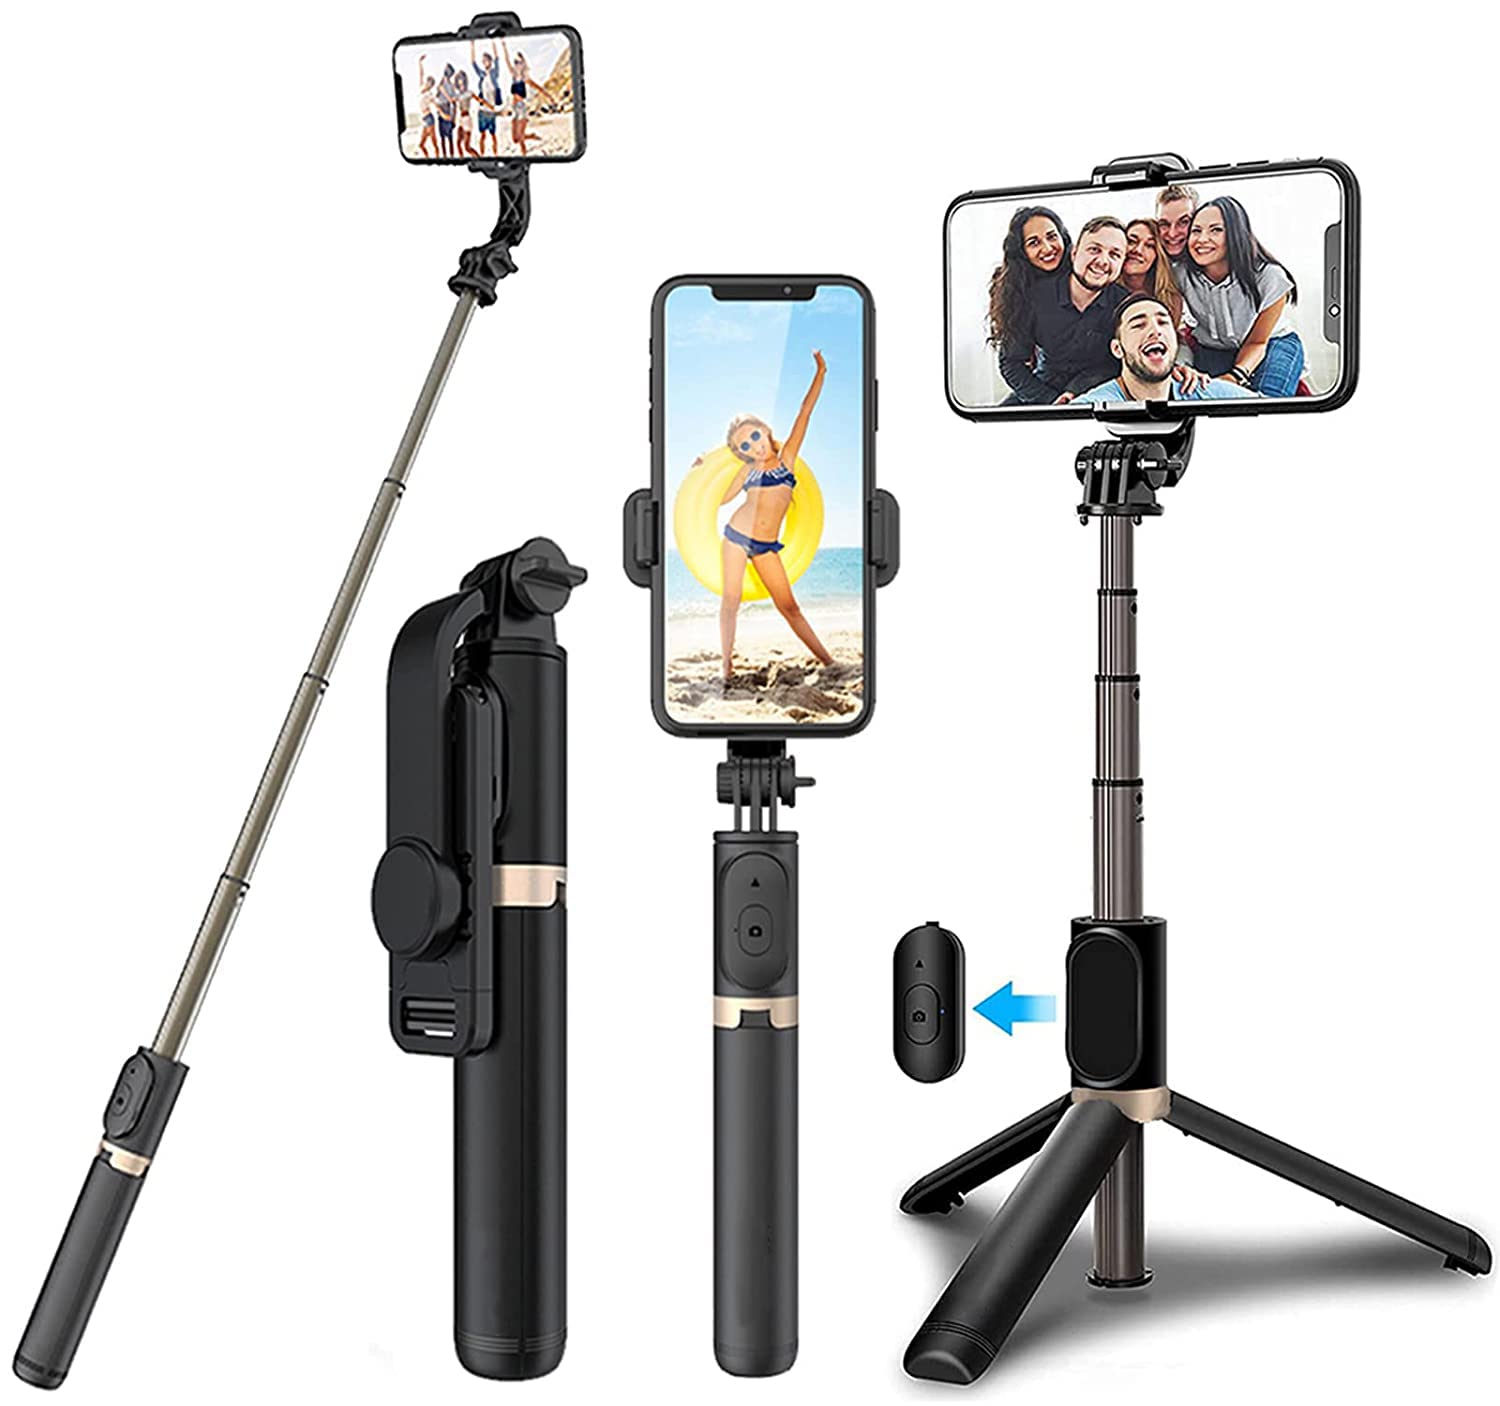 Multifunction Aluminum Tripod - with Phone Holder & Remote